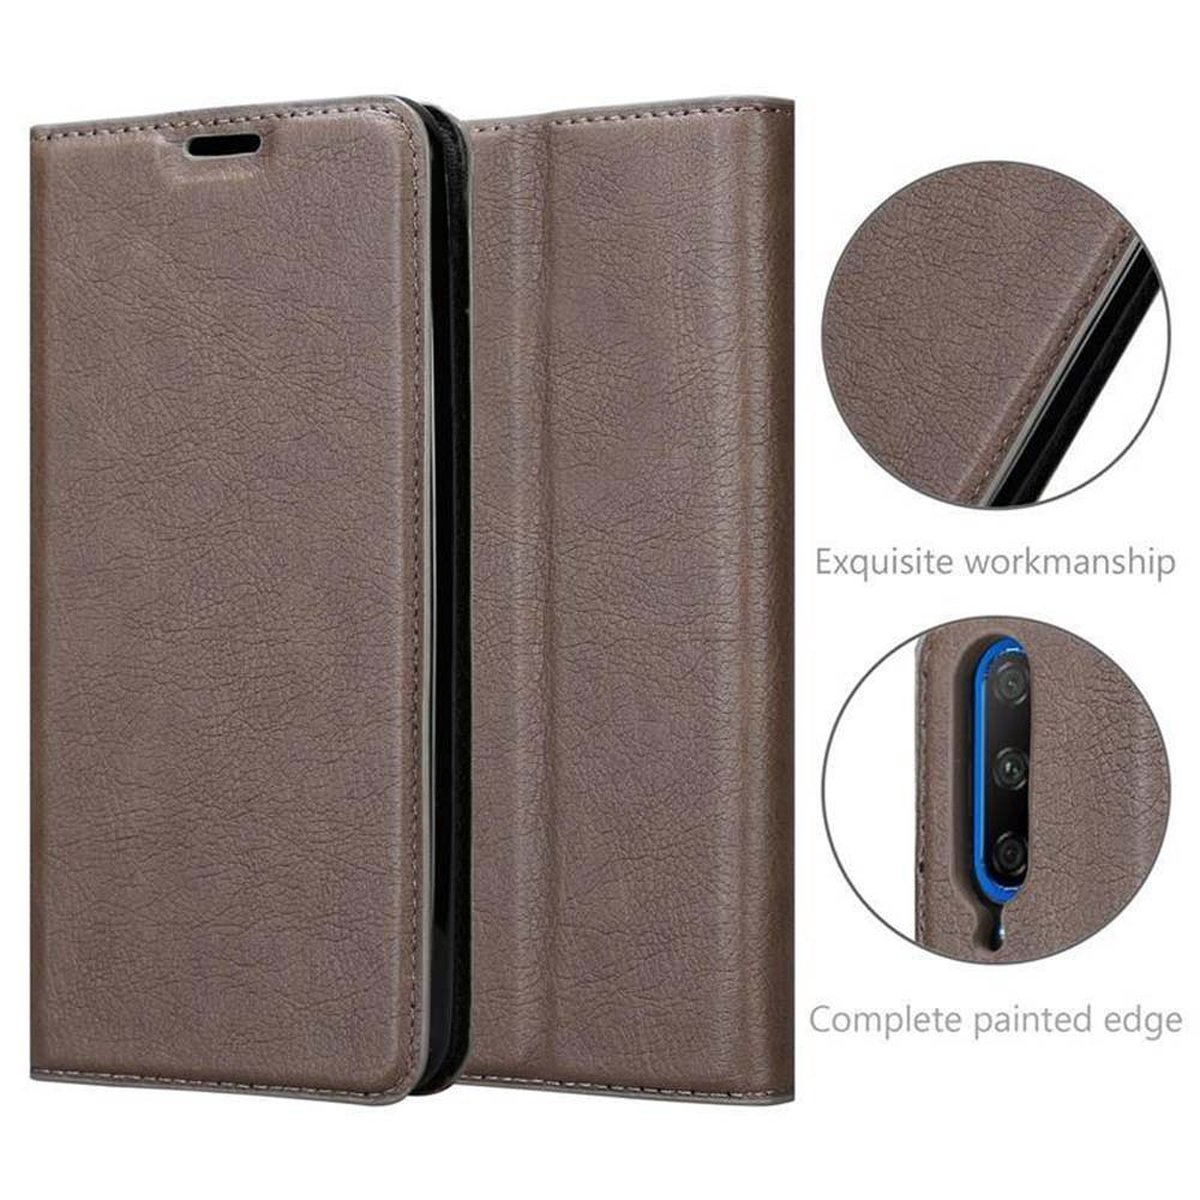 PRO, Honor, CADORABO Bookcover, Hülle Invisible Book 9X KAFFEE BRAUN Magnet,